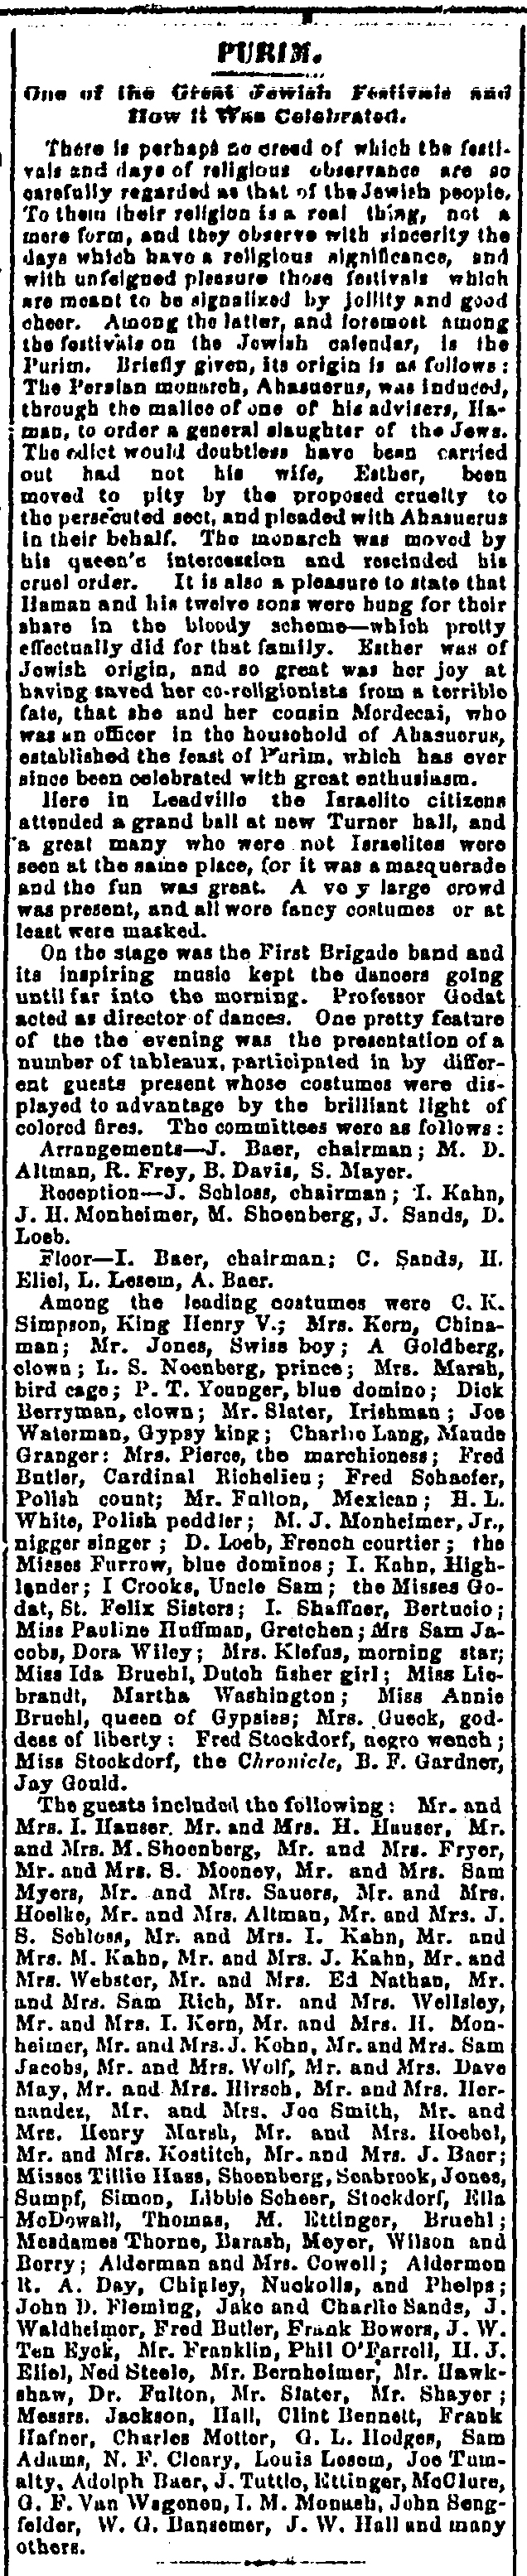 Leadville Daily Herald. Friday, March 23, 1883.